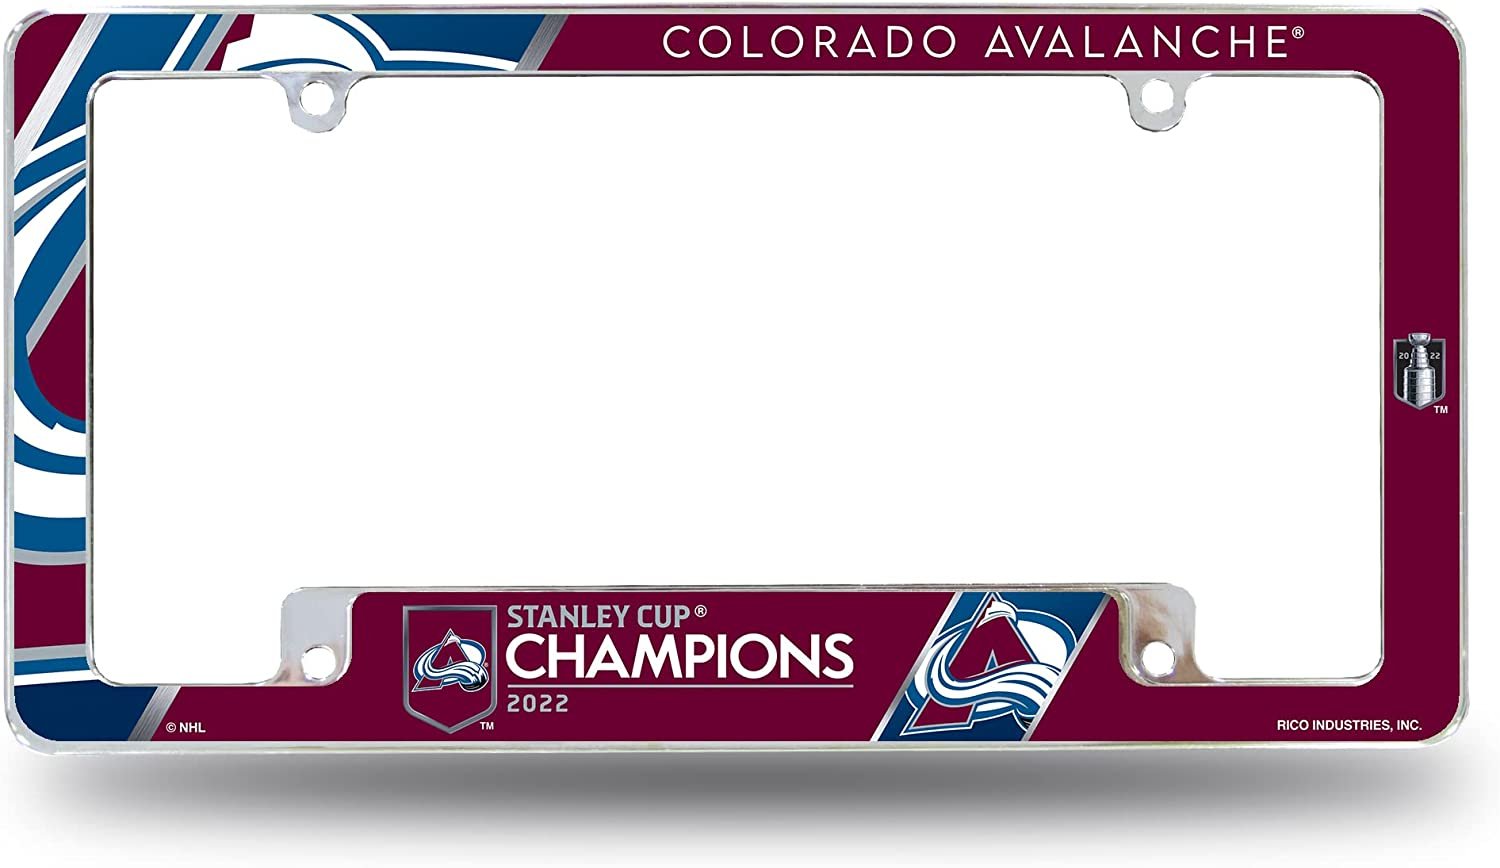 Colorado Avalanche 2022 Champions Metal License Plate Frame Chrome Tag Cover 6x12 Inch